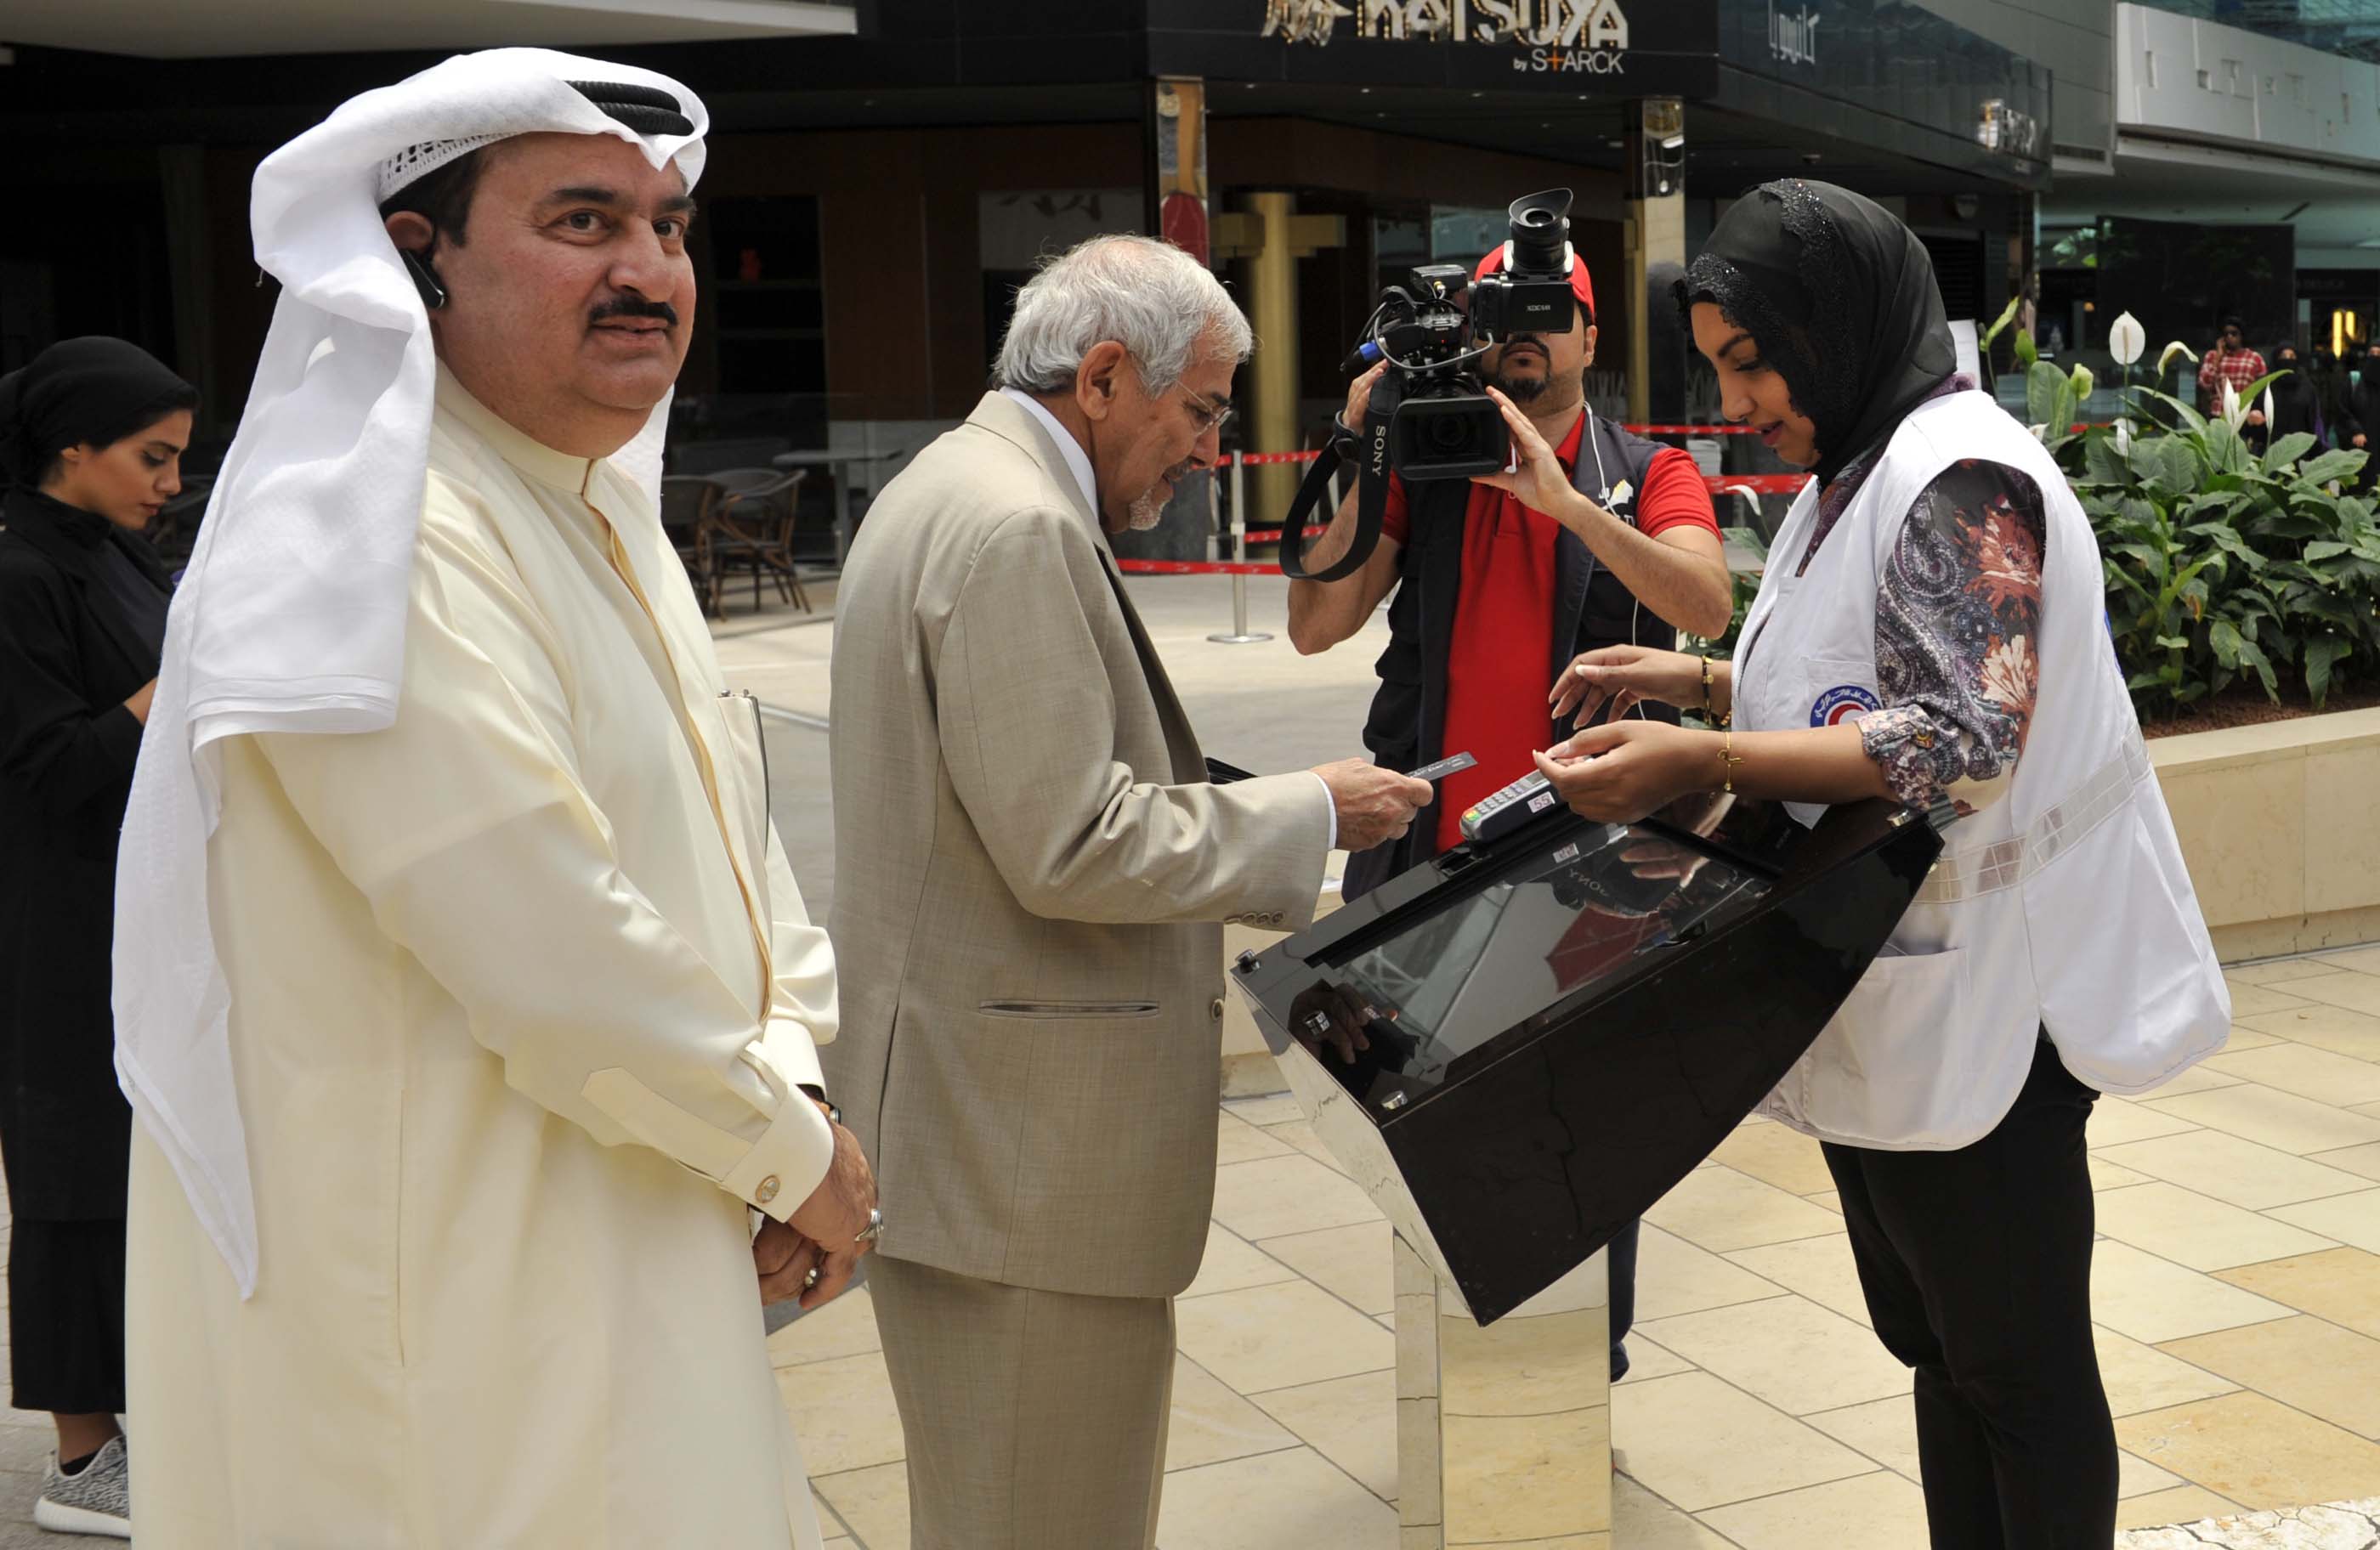 Kuwait Red Crescent Society (KRCS) donation campaign to provide people in Africa with pure drinking water with the Avenues Mall